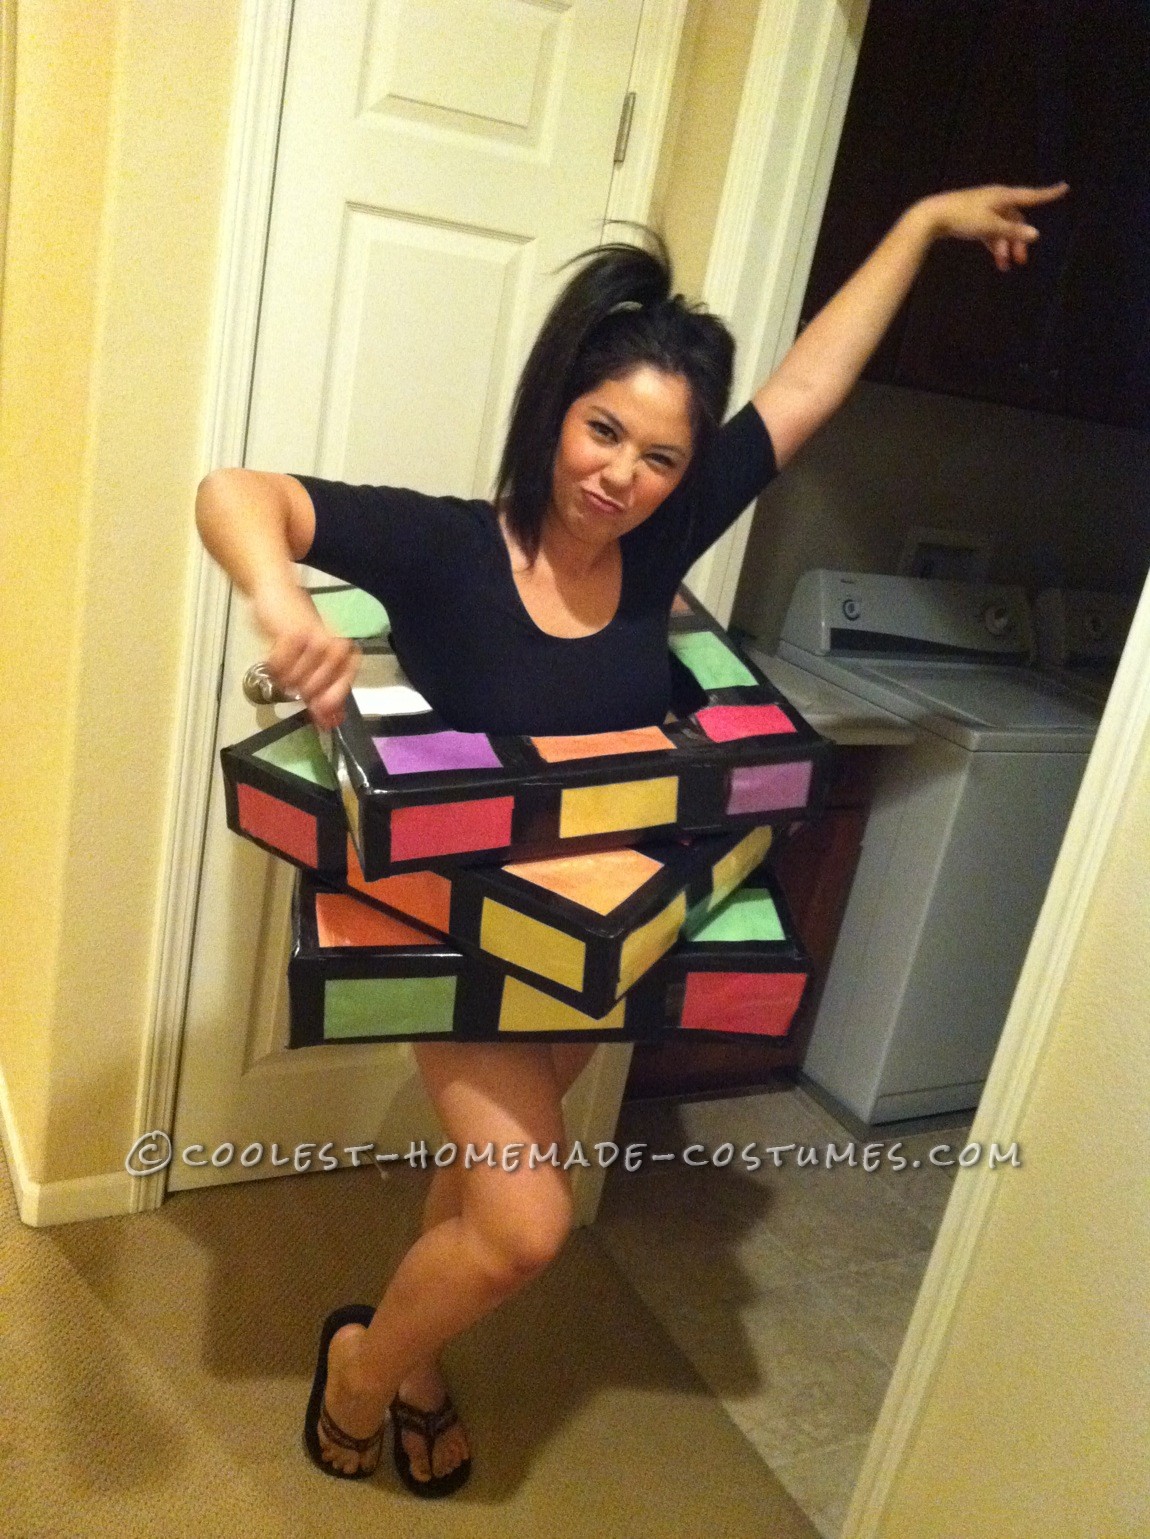 I planned to make a Rubik\'s cube costume way before halloween just never got around to it until the day before halloween hit! I love getting artsy